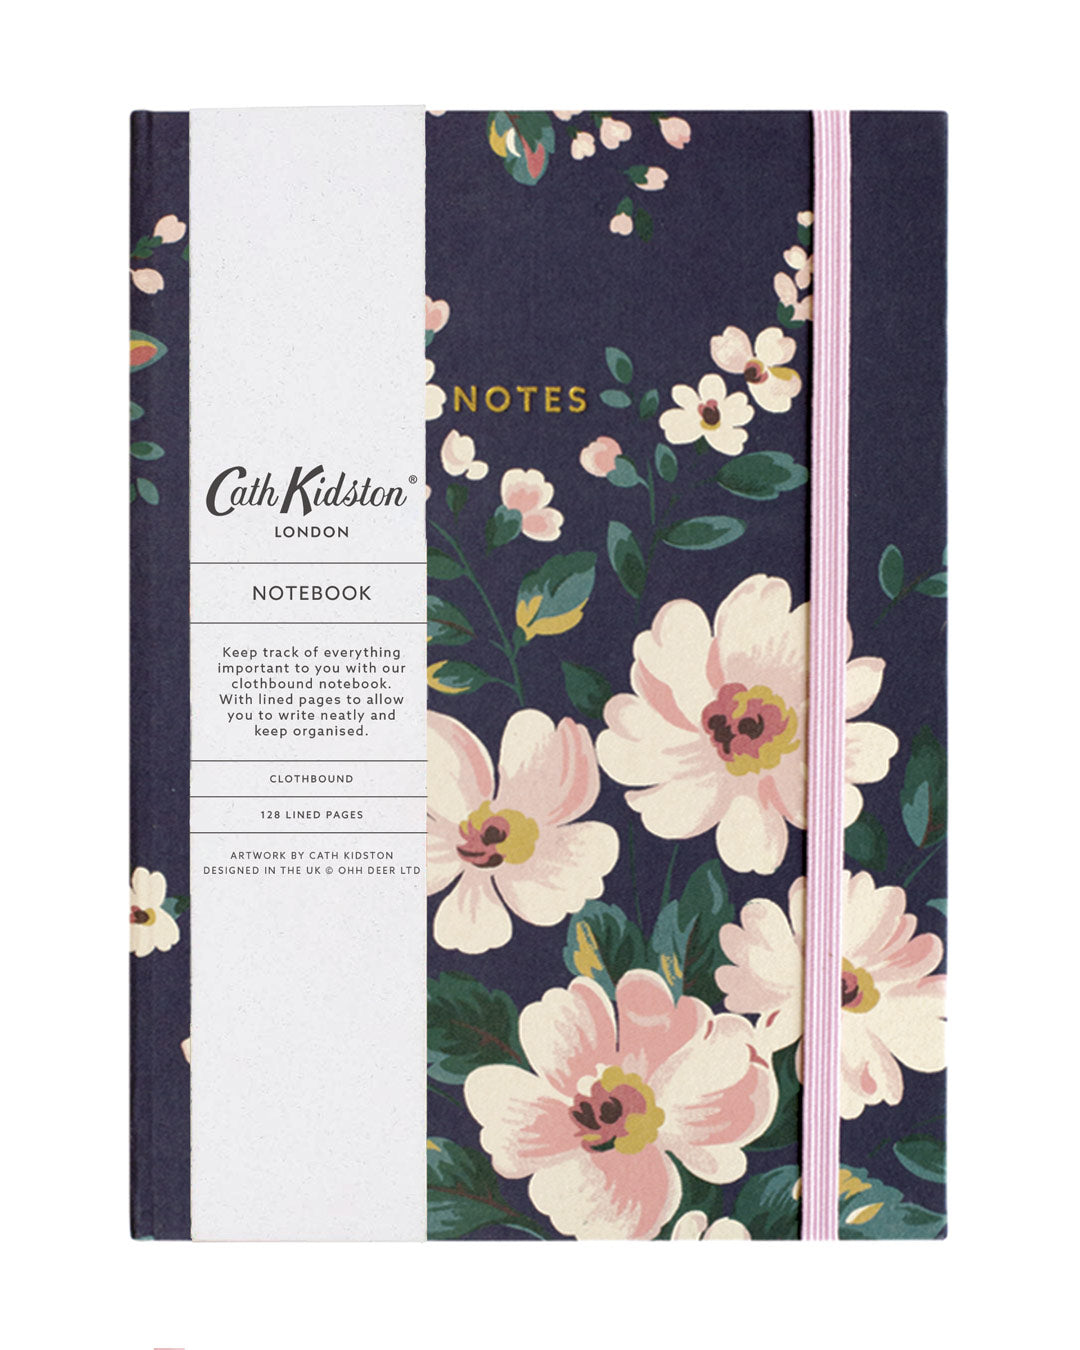 Cath Kidston Notebook | Premium A5 Illustrated Notebook | Navy Floral | 128 Lined Pages | Gift for Stationery Lovers